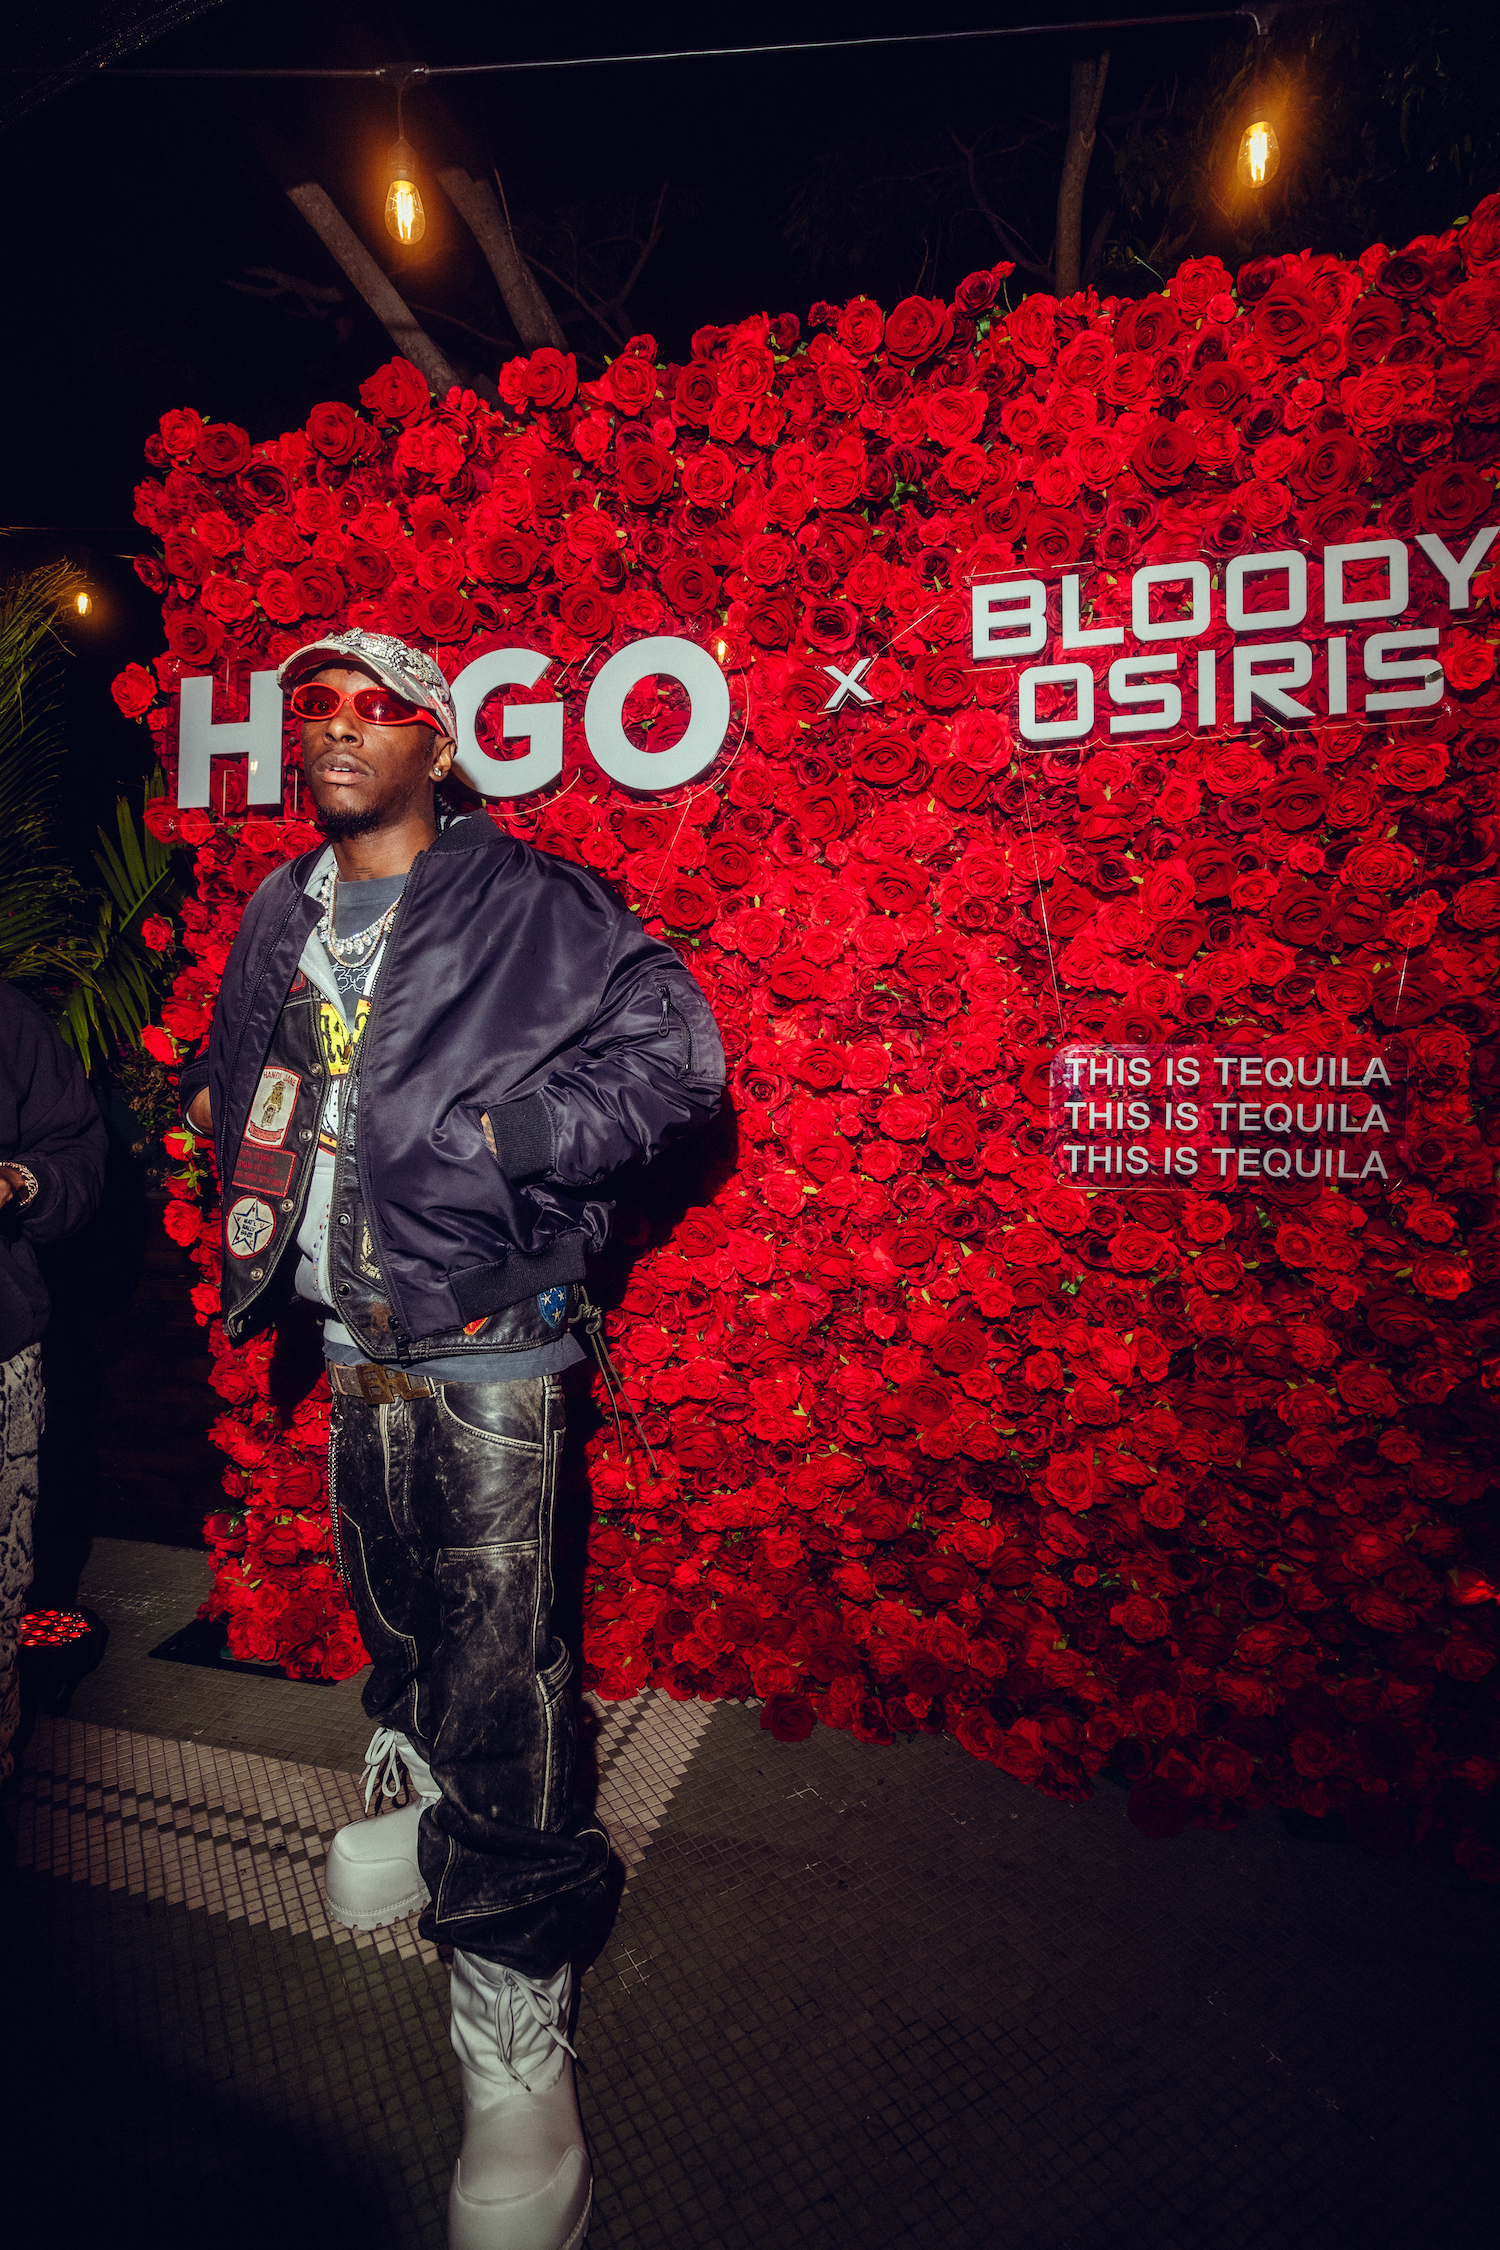 See What Went Down At The Hugo x Bloody Osiris Event in Miami